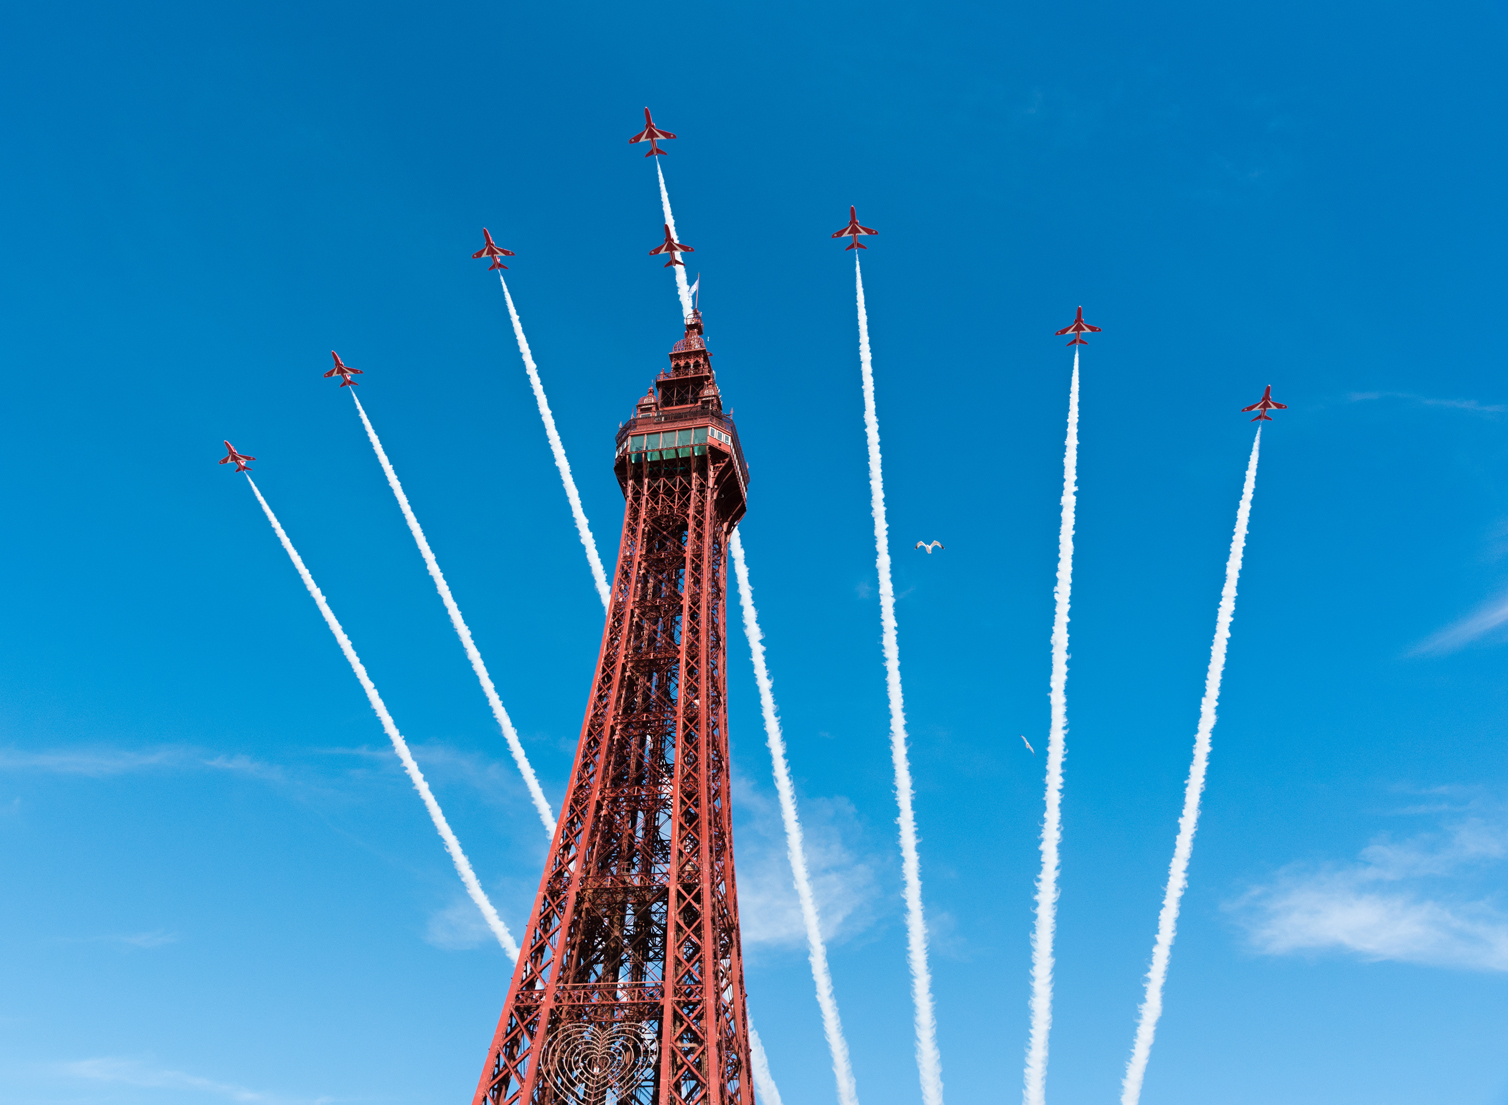 The Red Arrows arrive in Blackpool